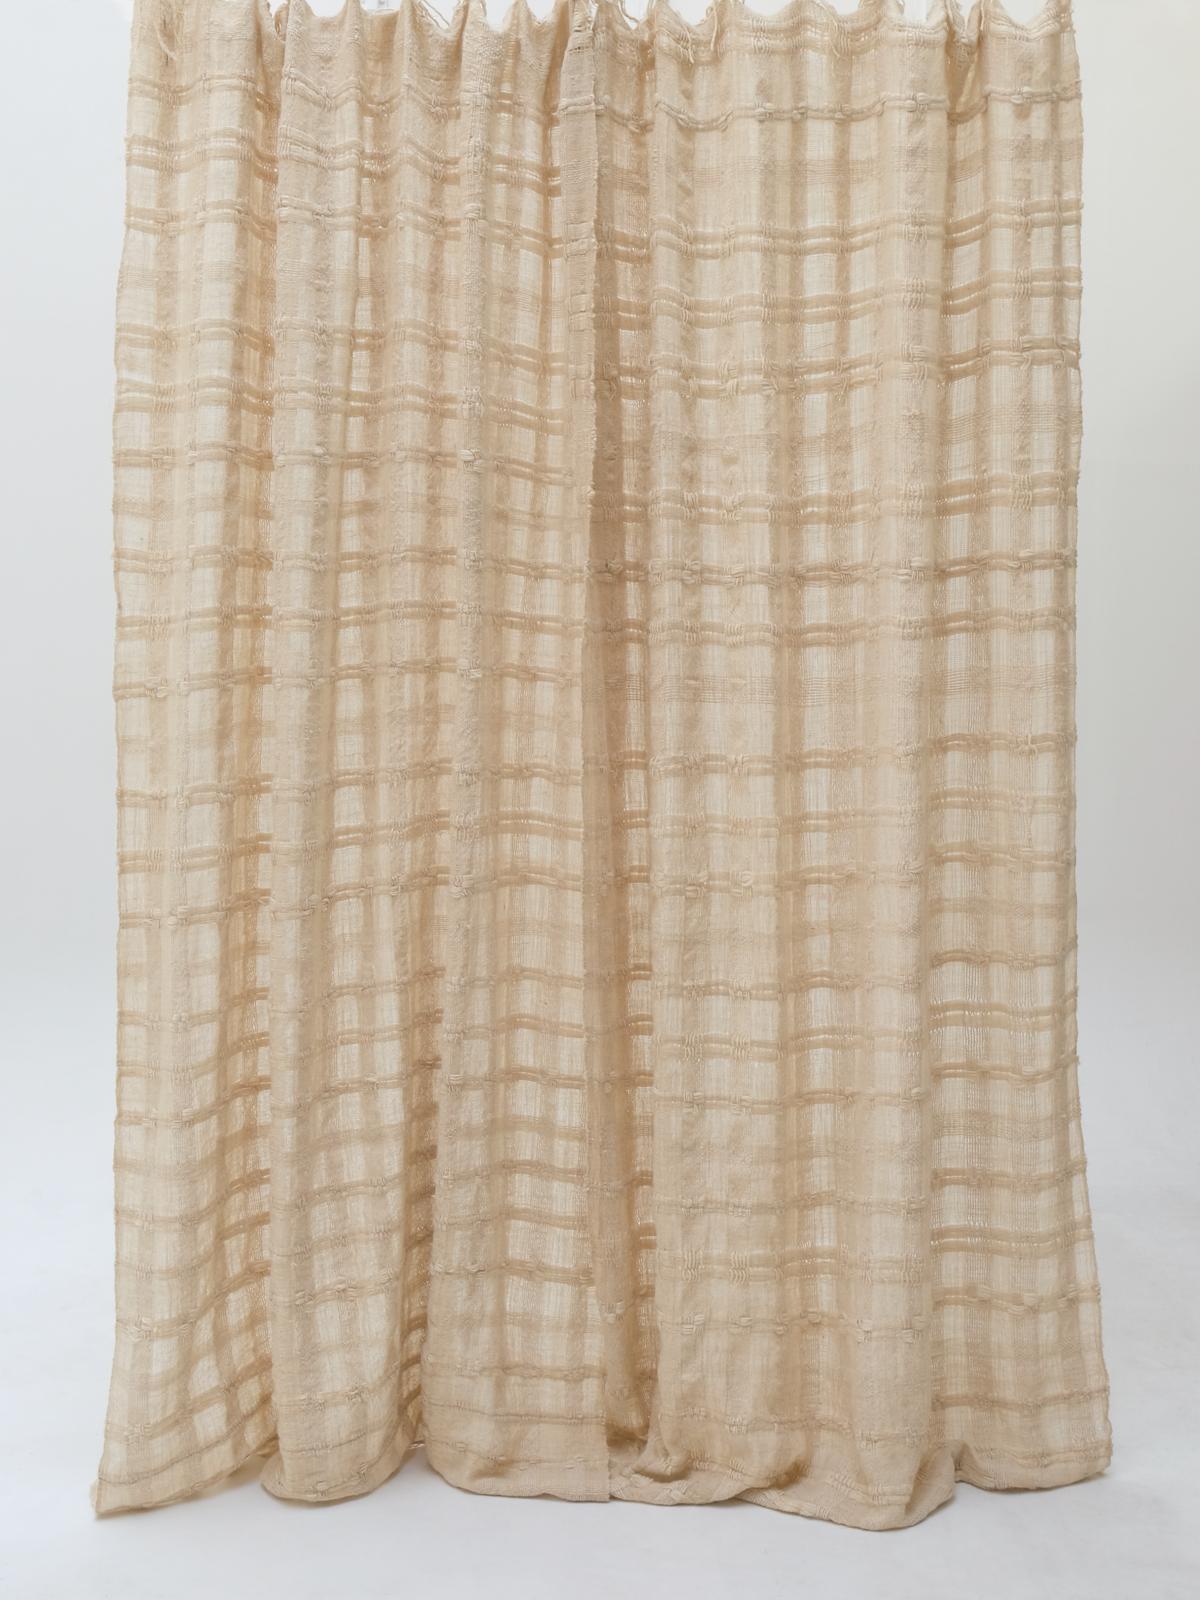 Hand-Crafted Curtains Made of handspun and handwoven local Wool For Sale